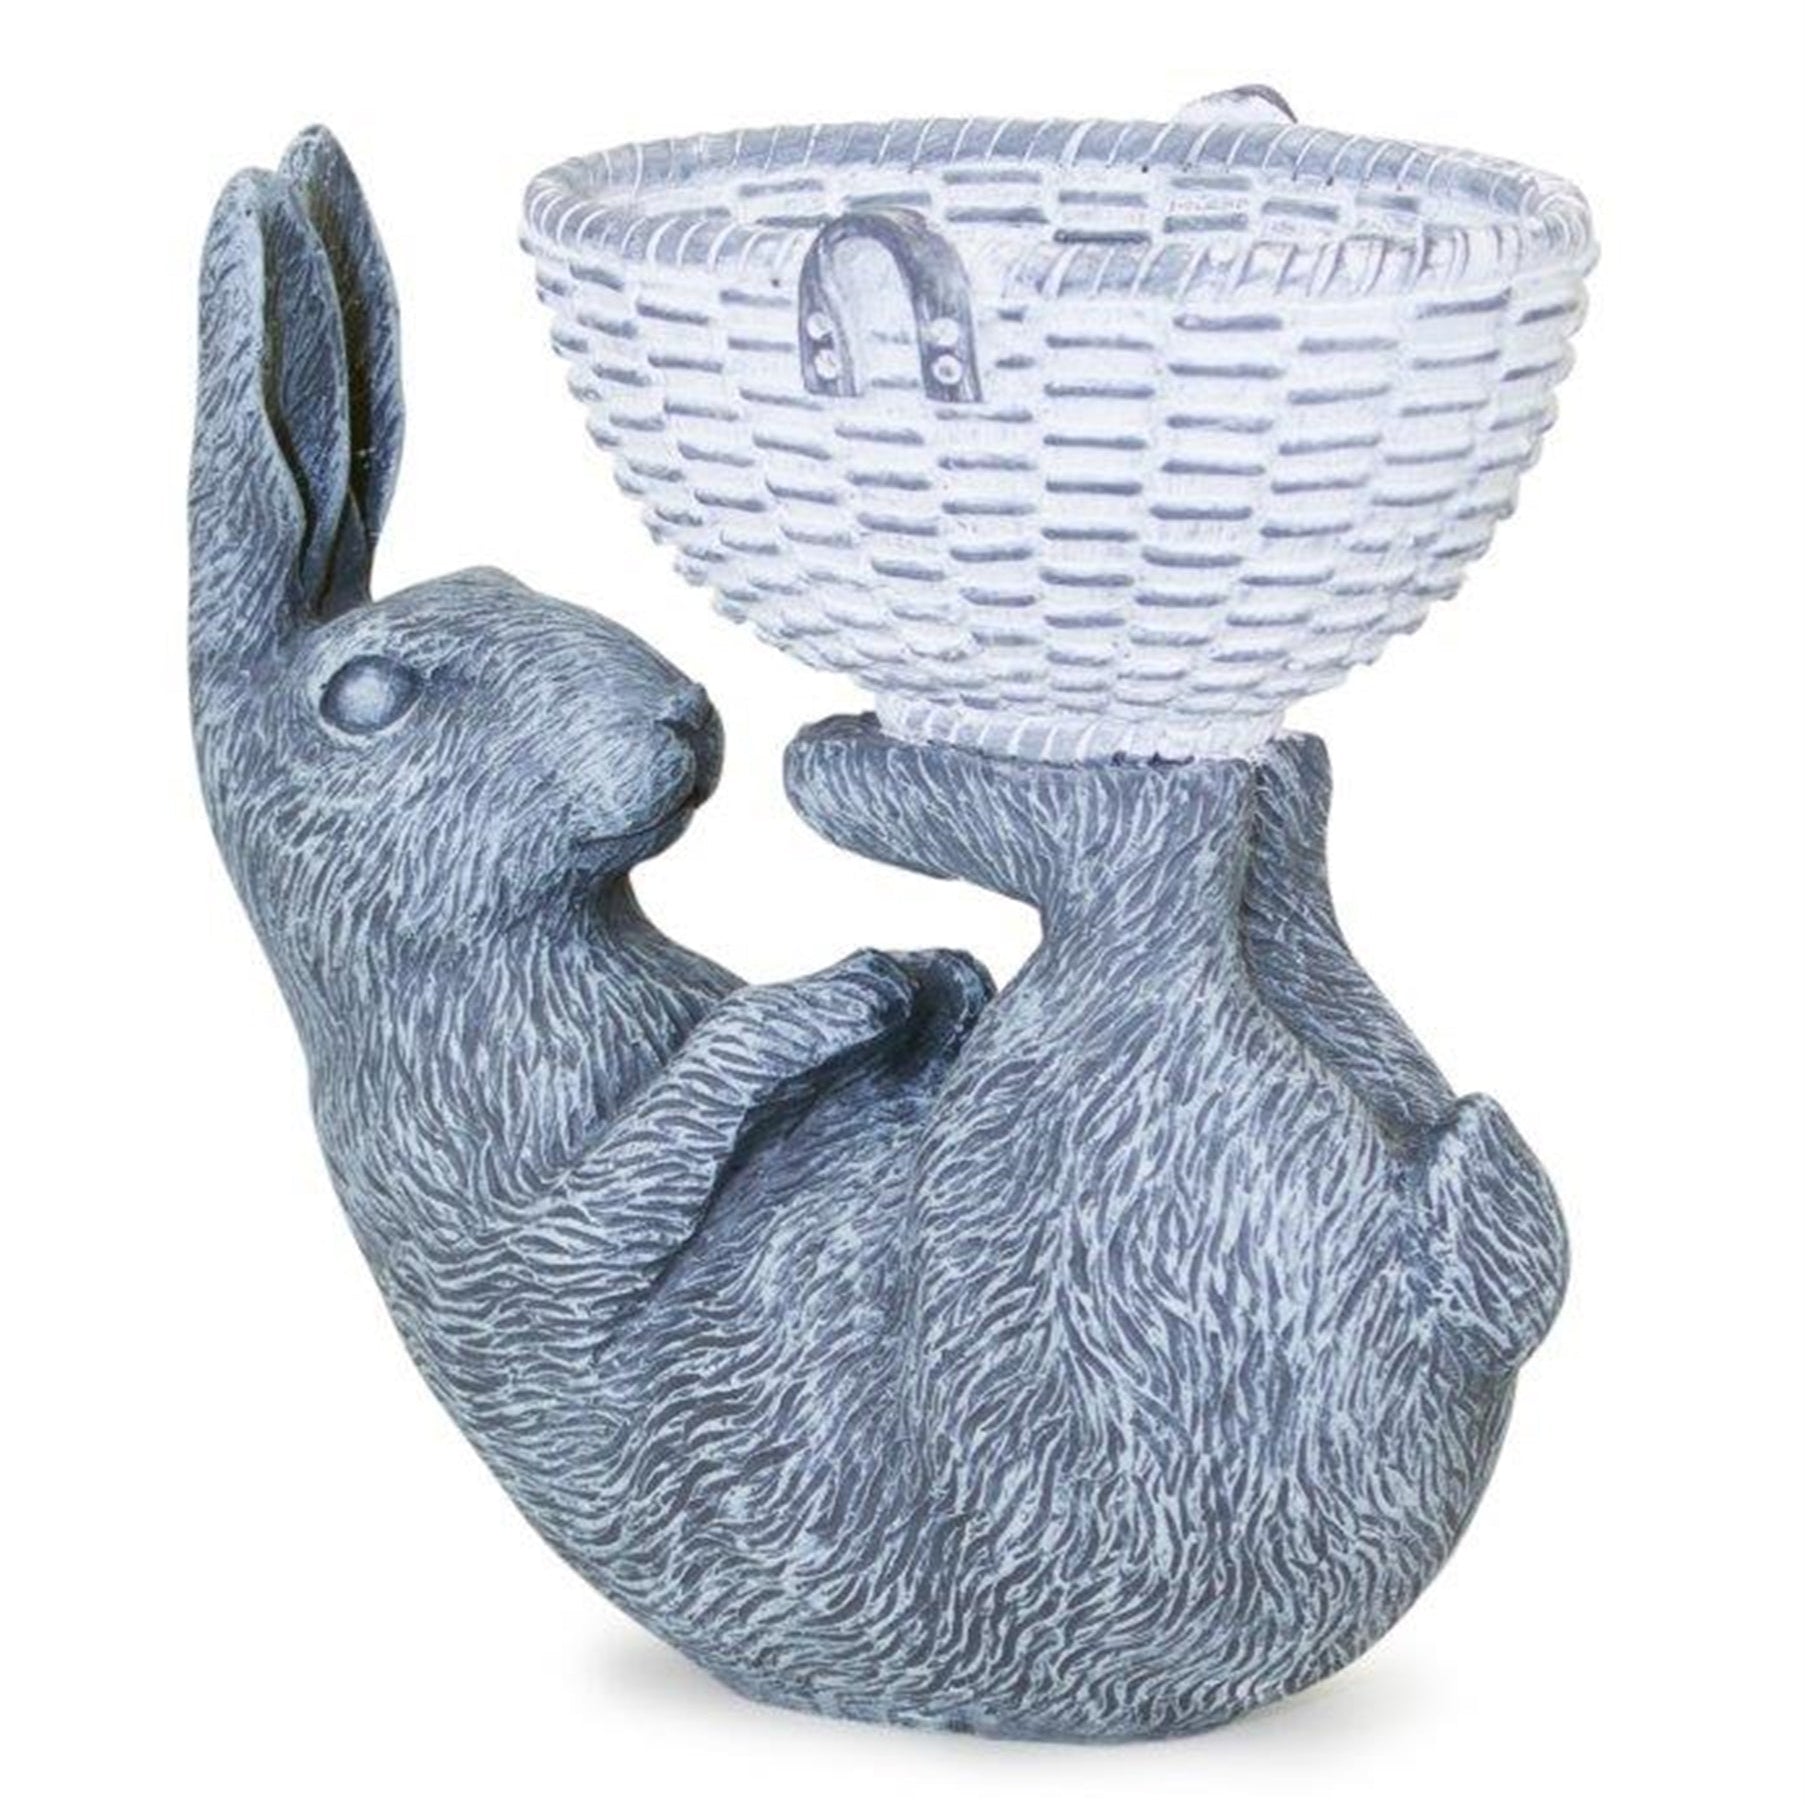 Laying Rabbit Figurine with Basket Accent 10.5" - Decor